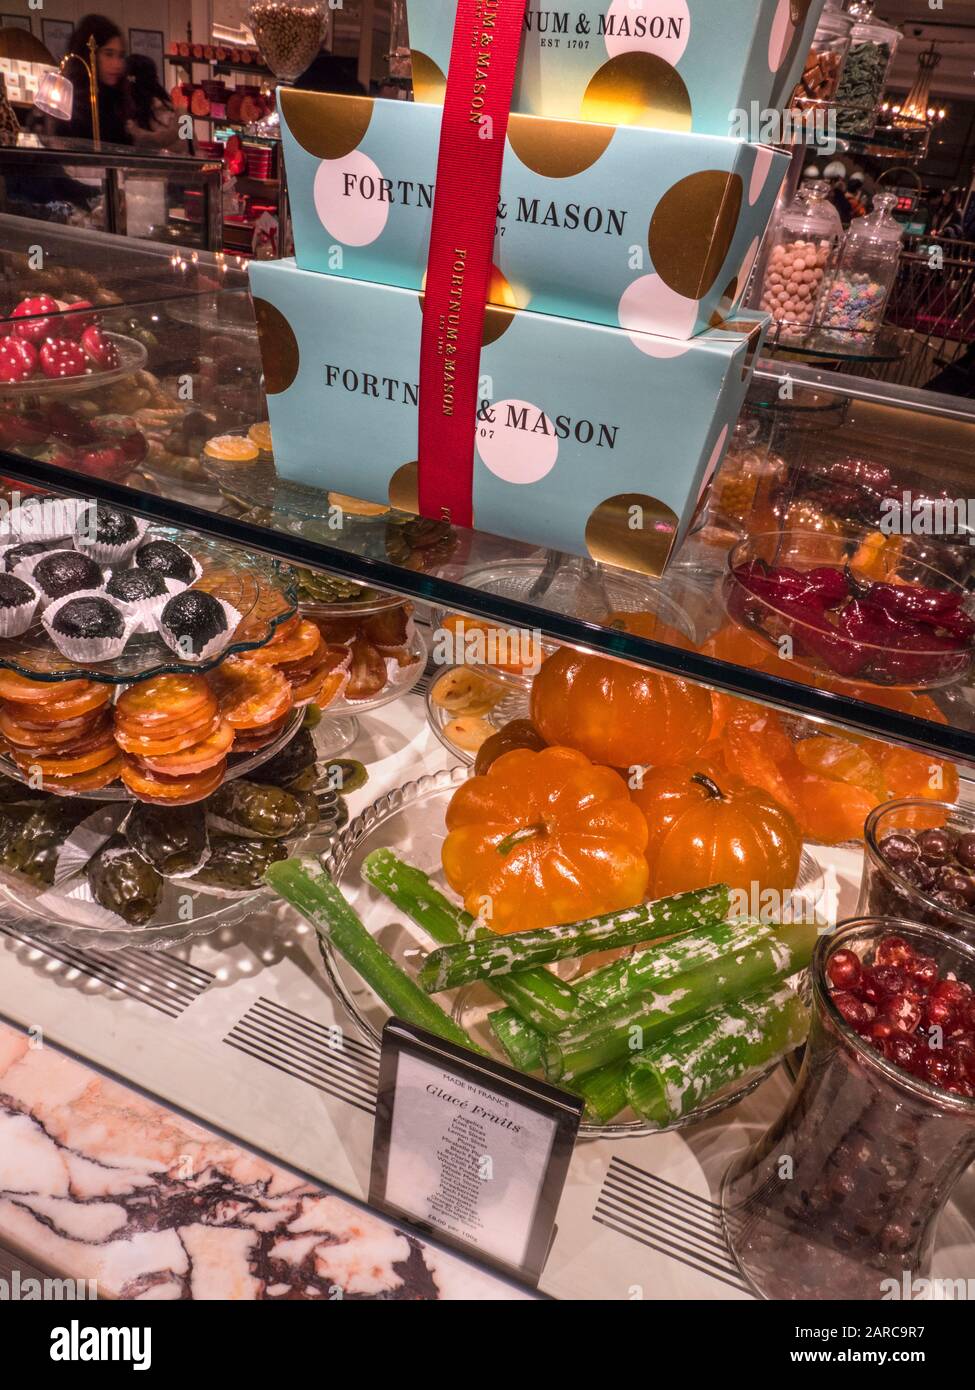 Fortnum & Mason Food Hall with luxury display of hand made glacé fruits selection such as Angelica, Kiwi slices , Black figs, Lemon slices, Peach halves, Kumquats, Fortnum & Mason Food Hall Piccadilly St. James's, London W1A 1ER Stock Photo